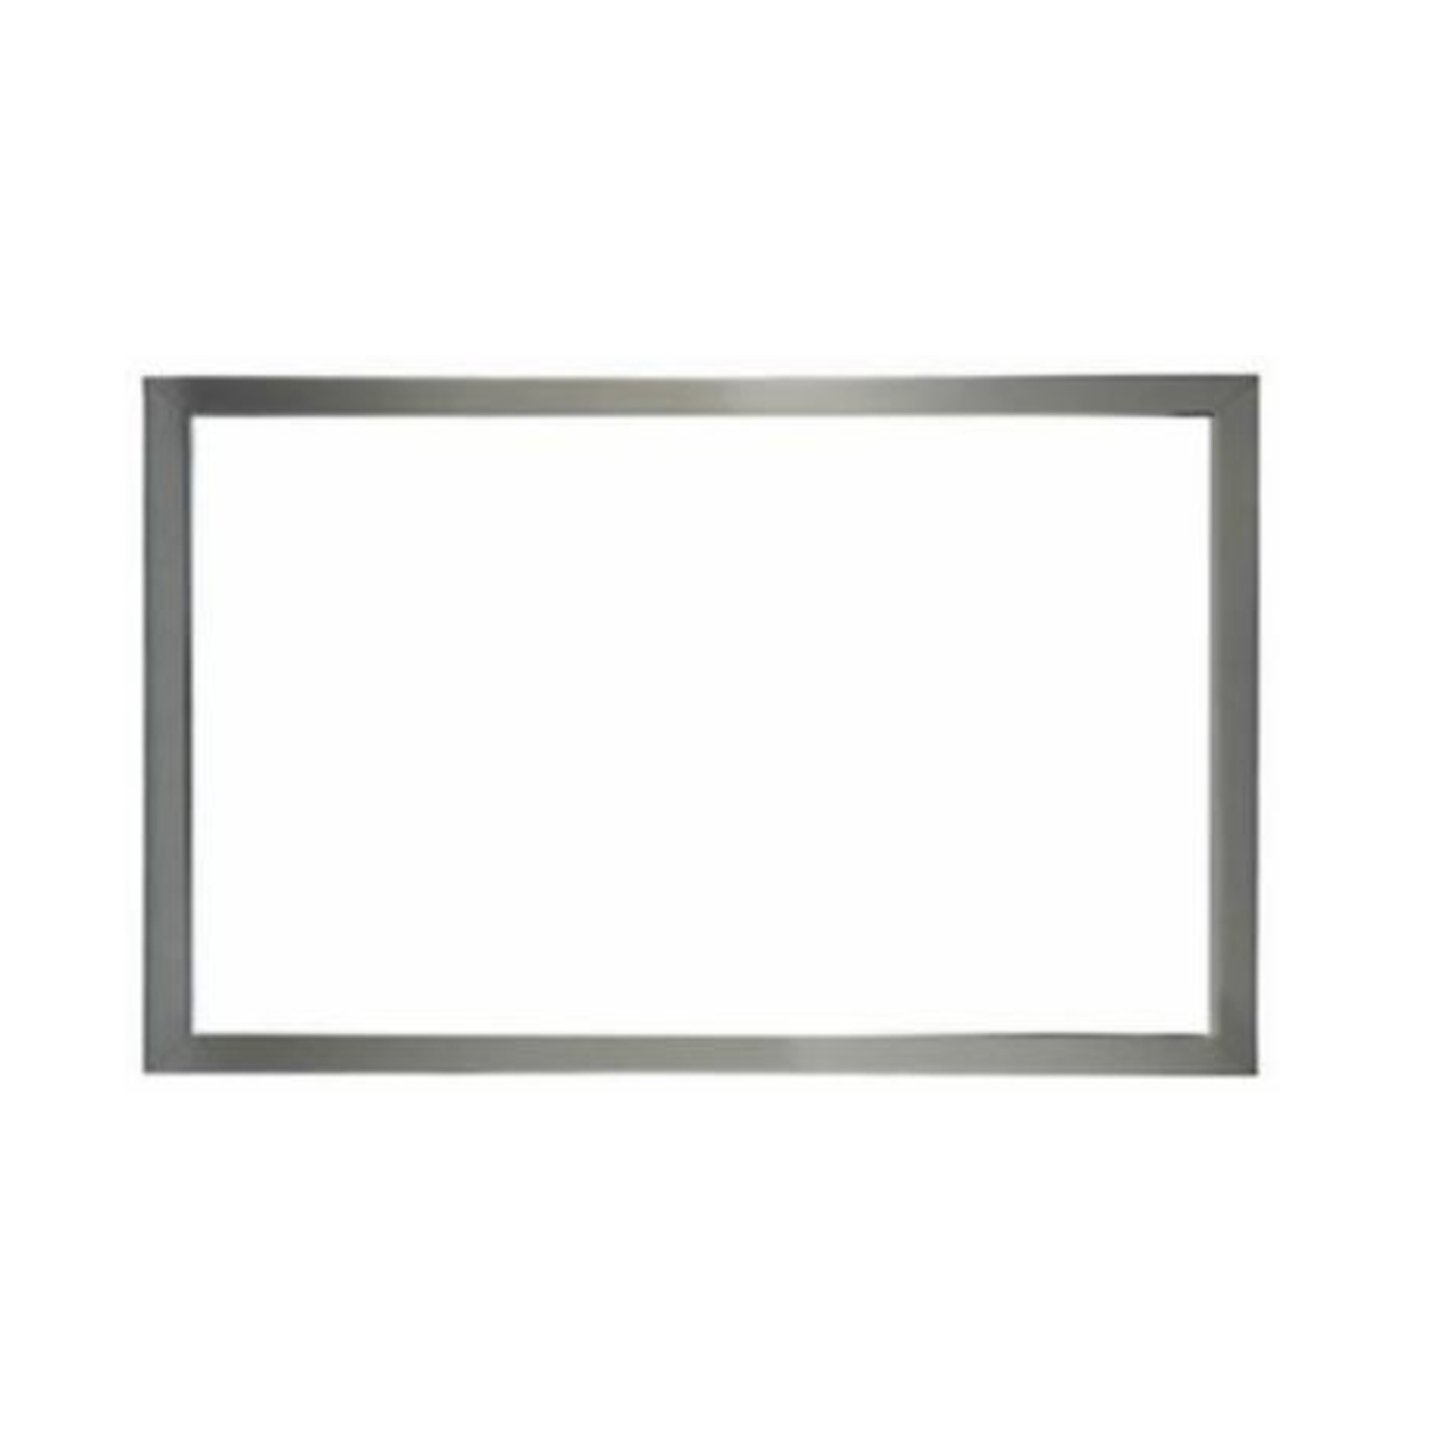 Empire 1.5-in. Oil-Rubbed Bronze Beveled Frame - DF502BZT